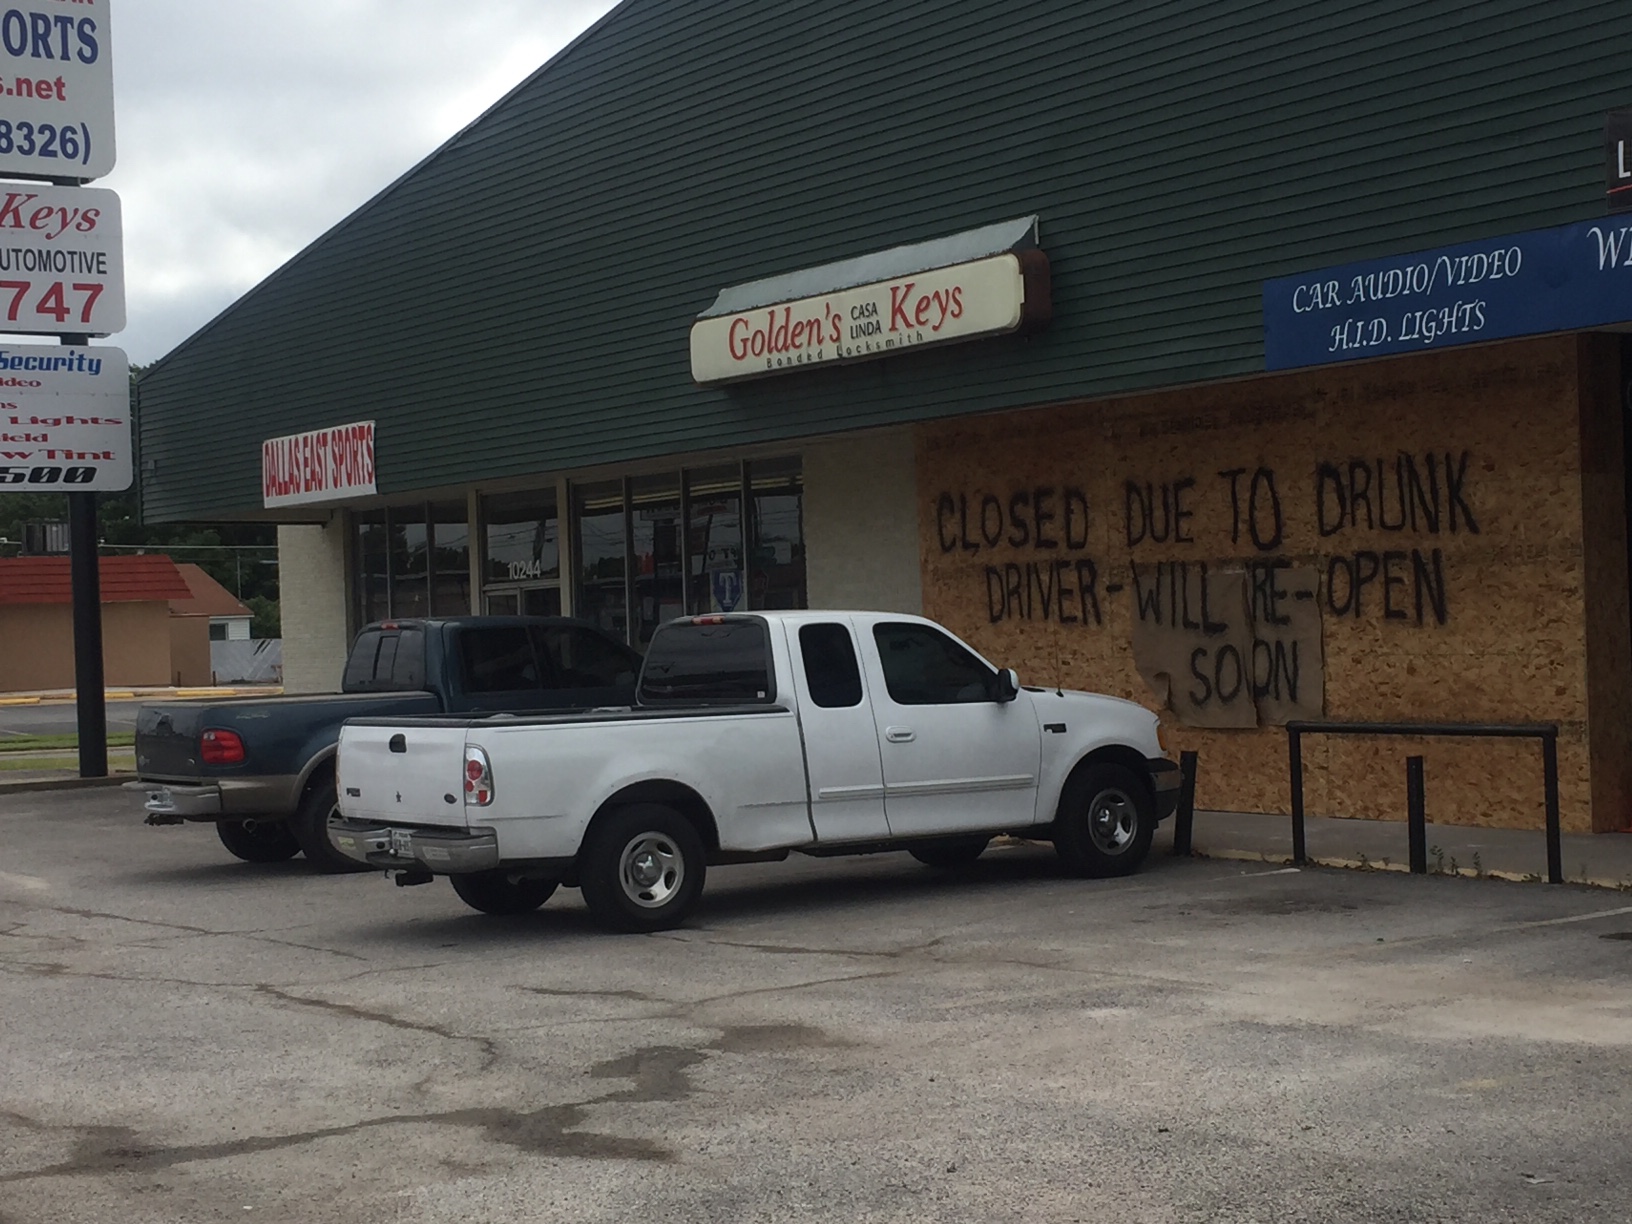 A drunk driver caused structural damage by running into Golden's Keys on Oct. 1. (Photo by Emily Williams)